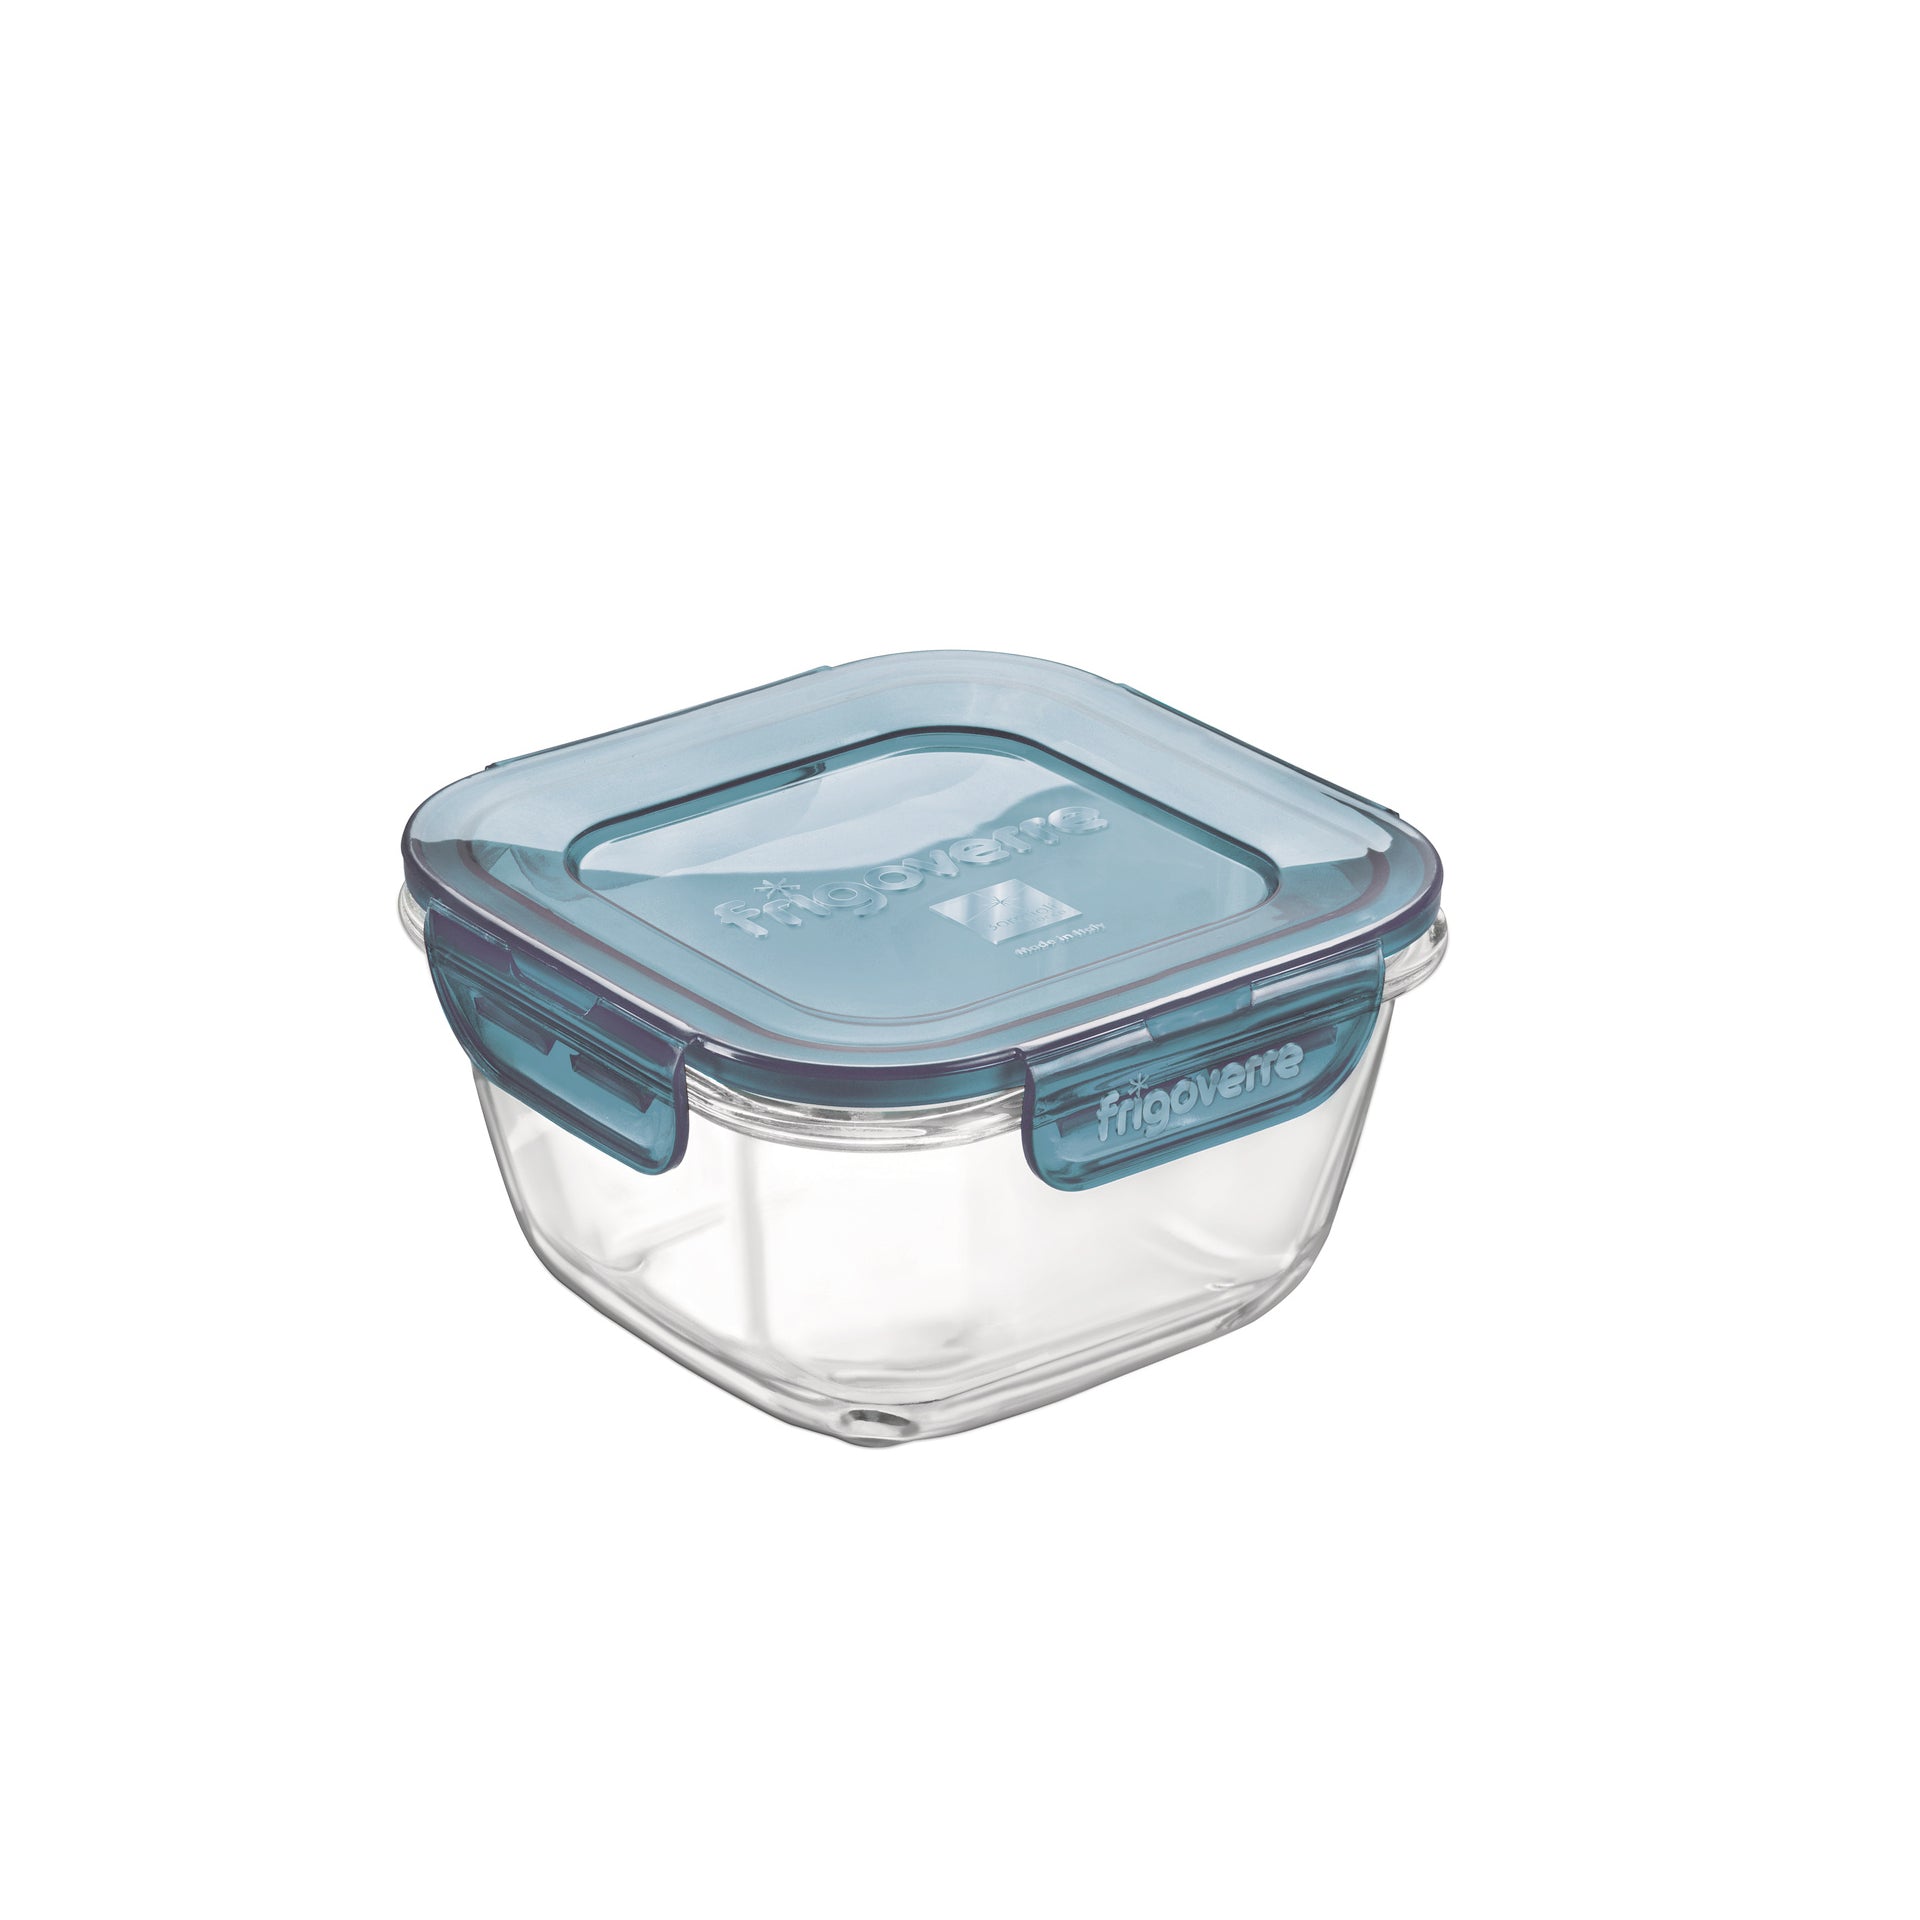 Frigoverre Evolution 25.25 oz Square Food Storage Container, Gray Lid (Set of 12)